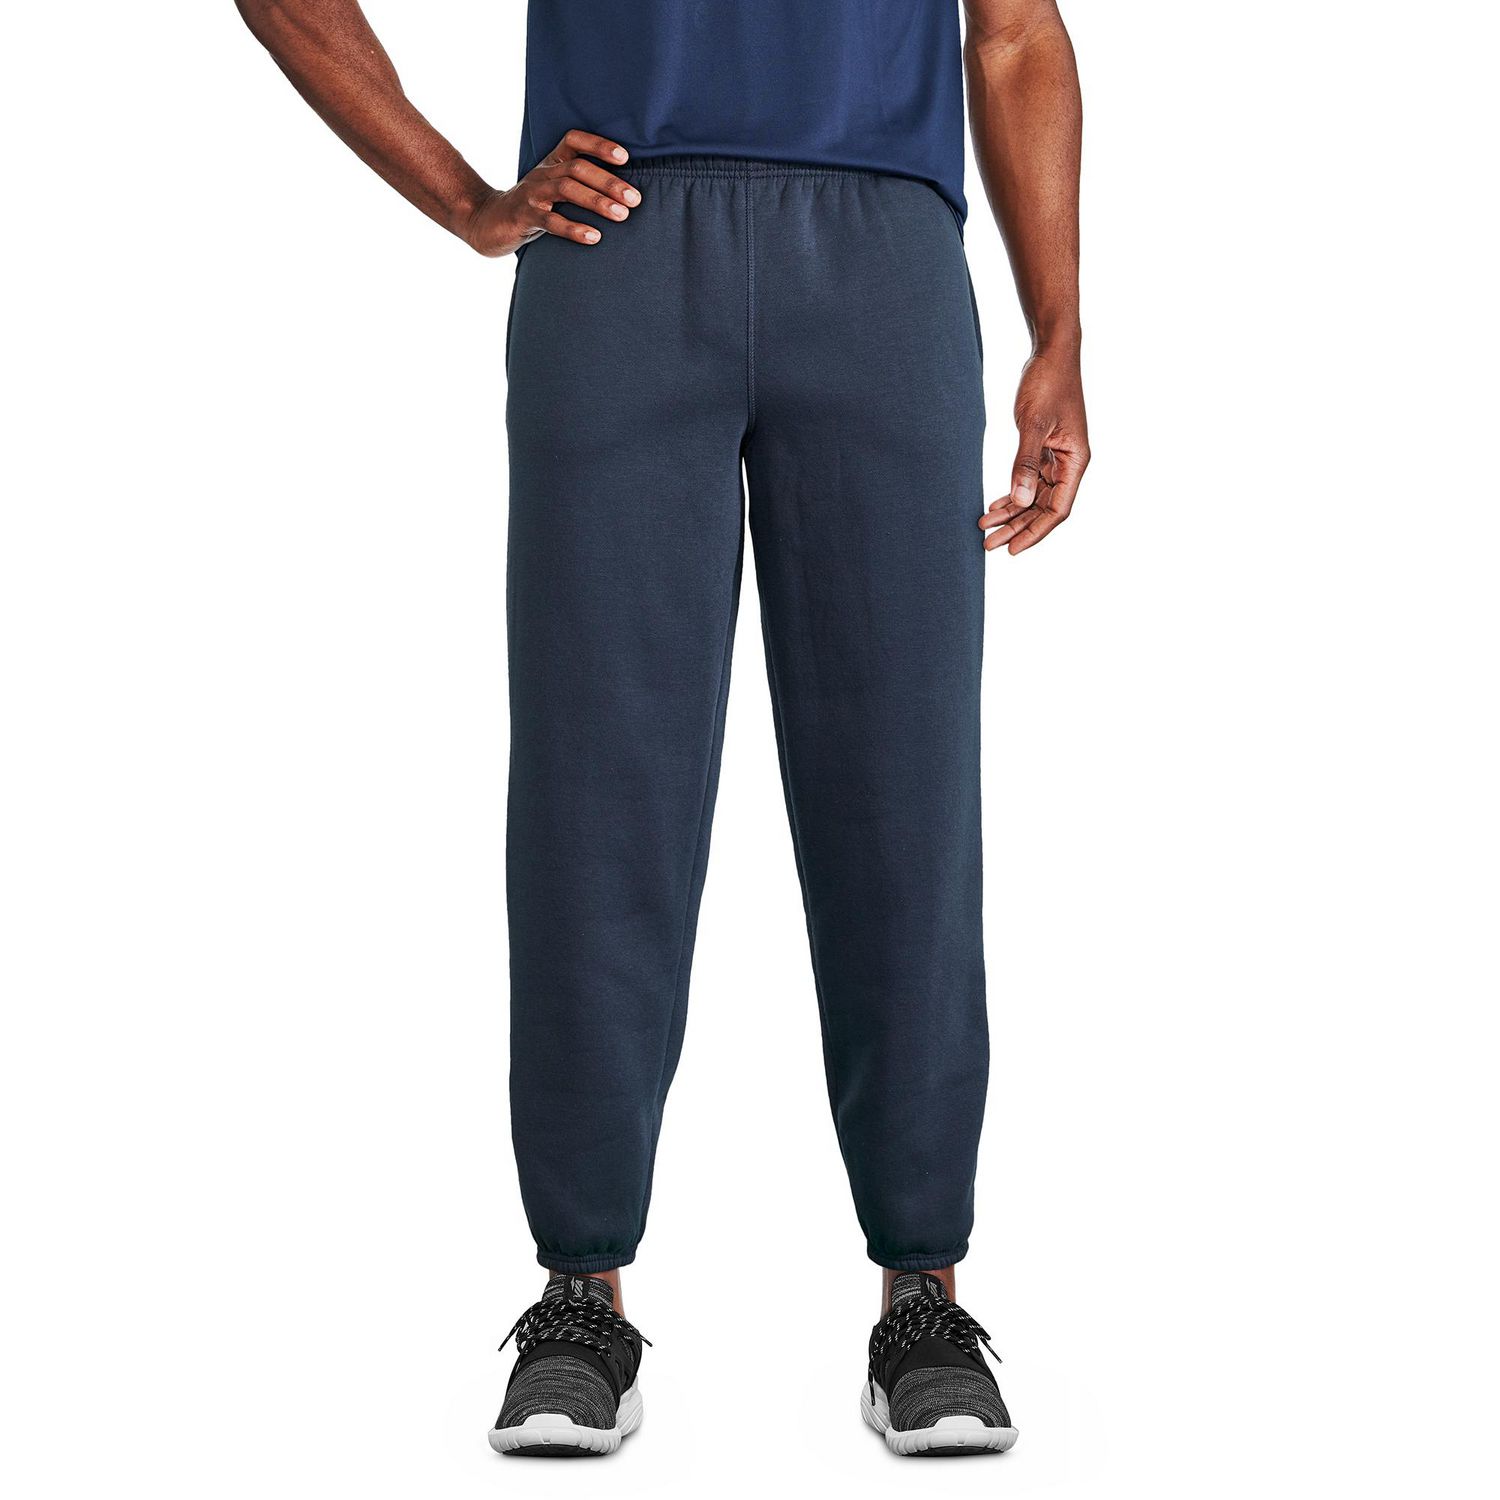  Under Armour Men's Essential Fleece Joggers, Black, S :  Clothing, Shoes & Jewelry